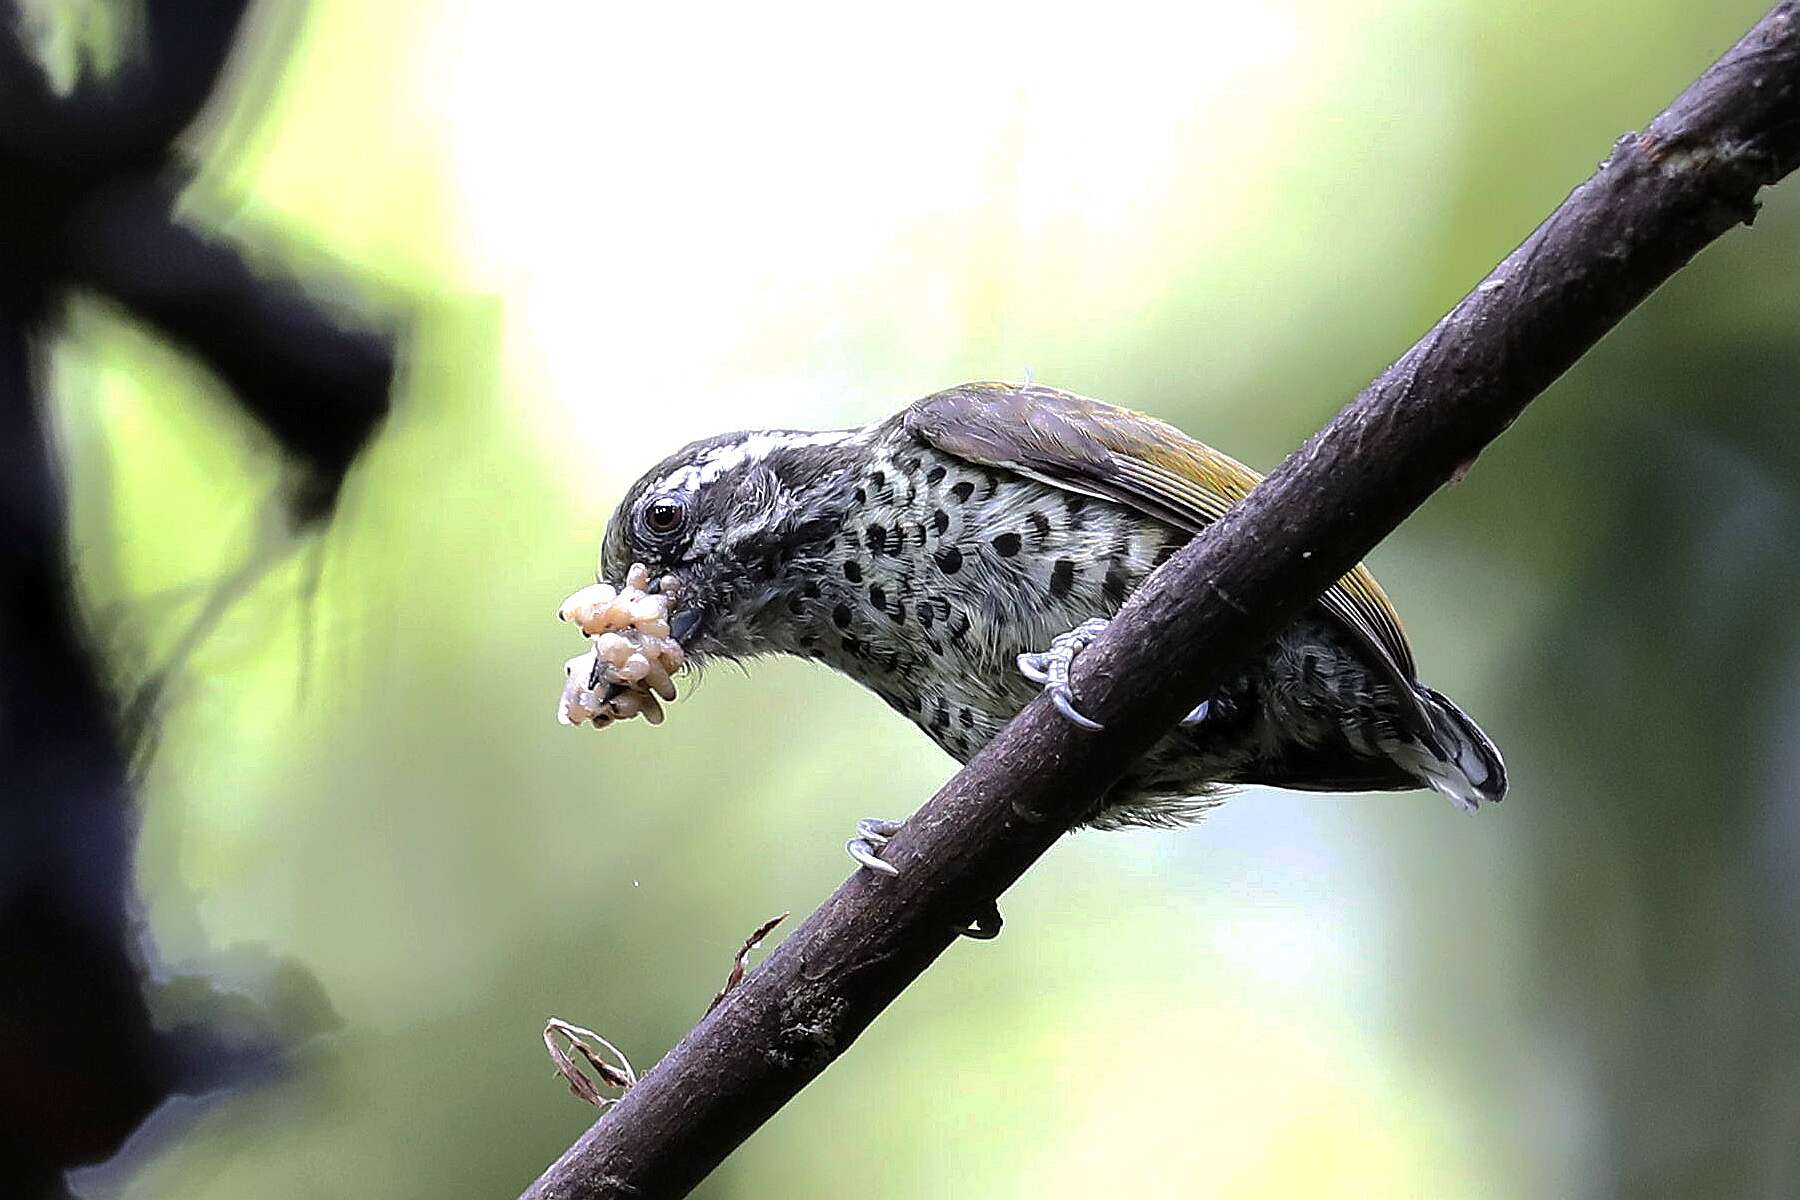 Image of Speckled Piculet